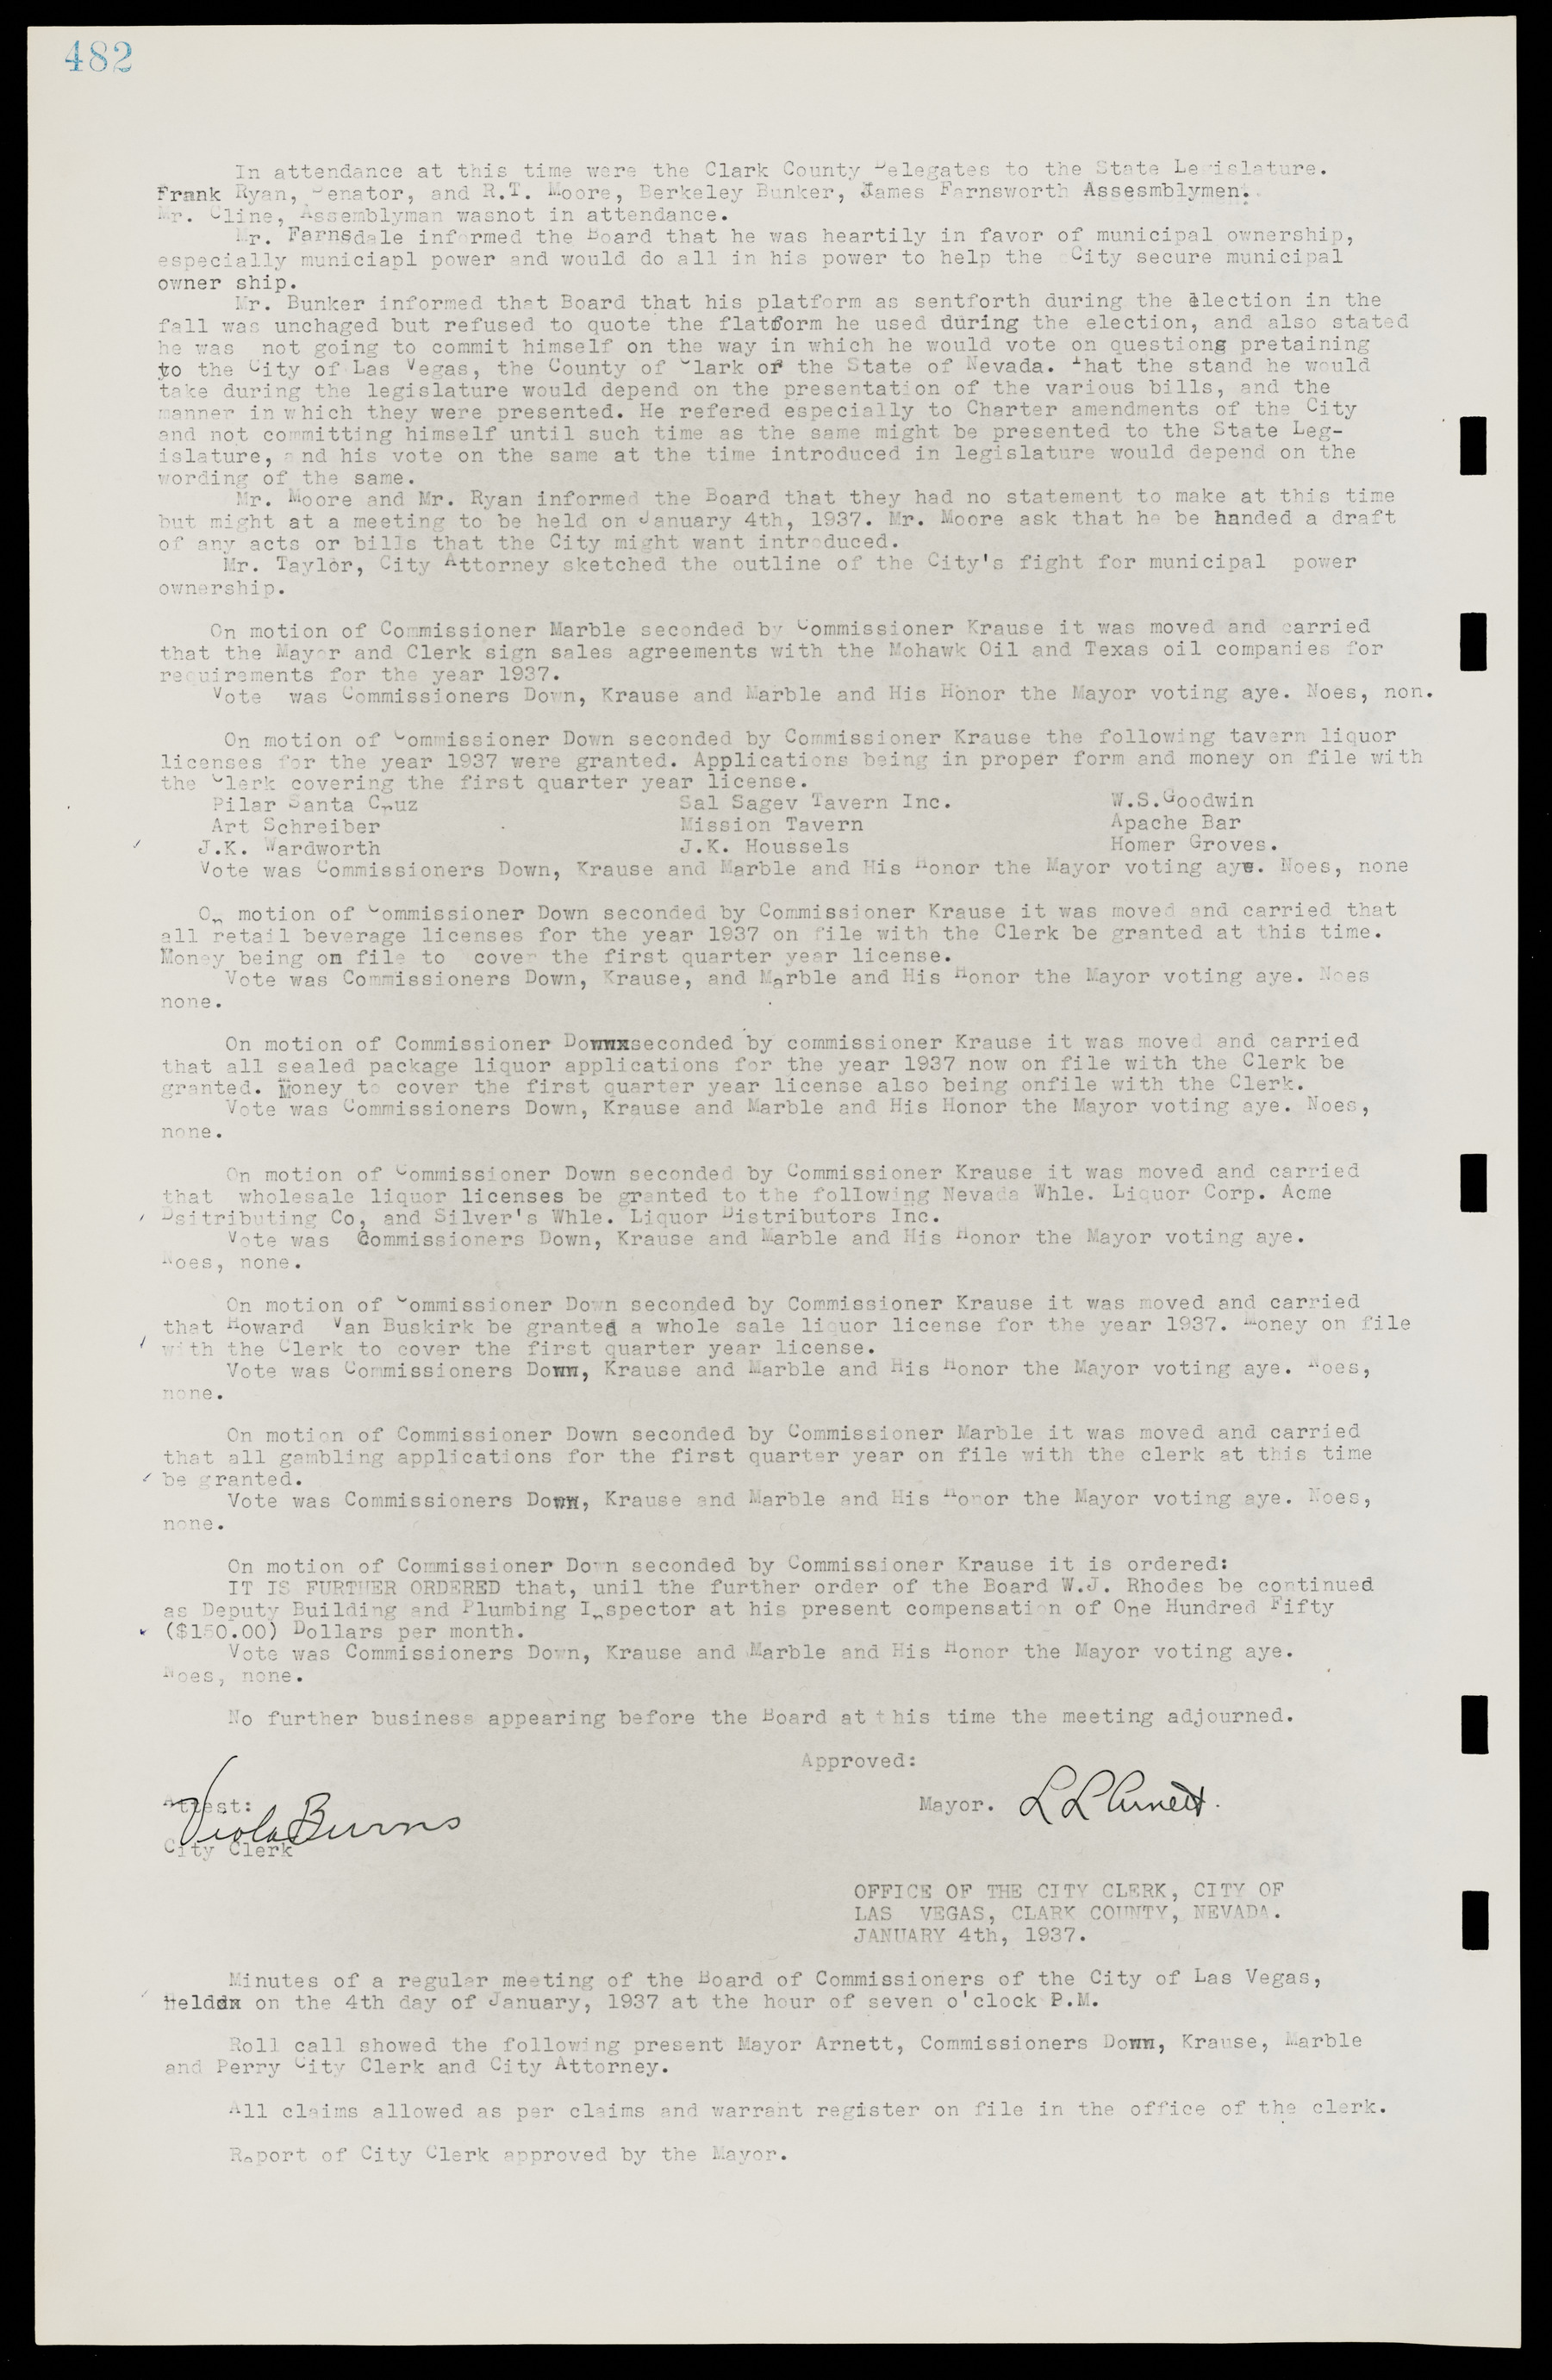 Las Vegas City Commission Minutes, May 14, 1929 to February 11, 1937, lvc000003-489